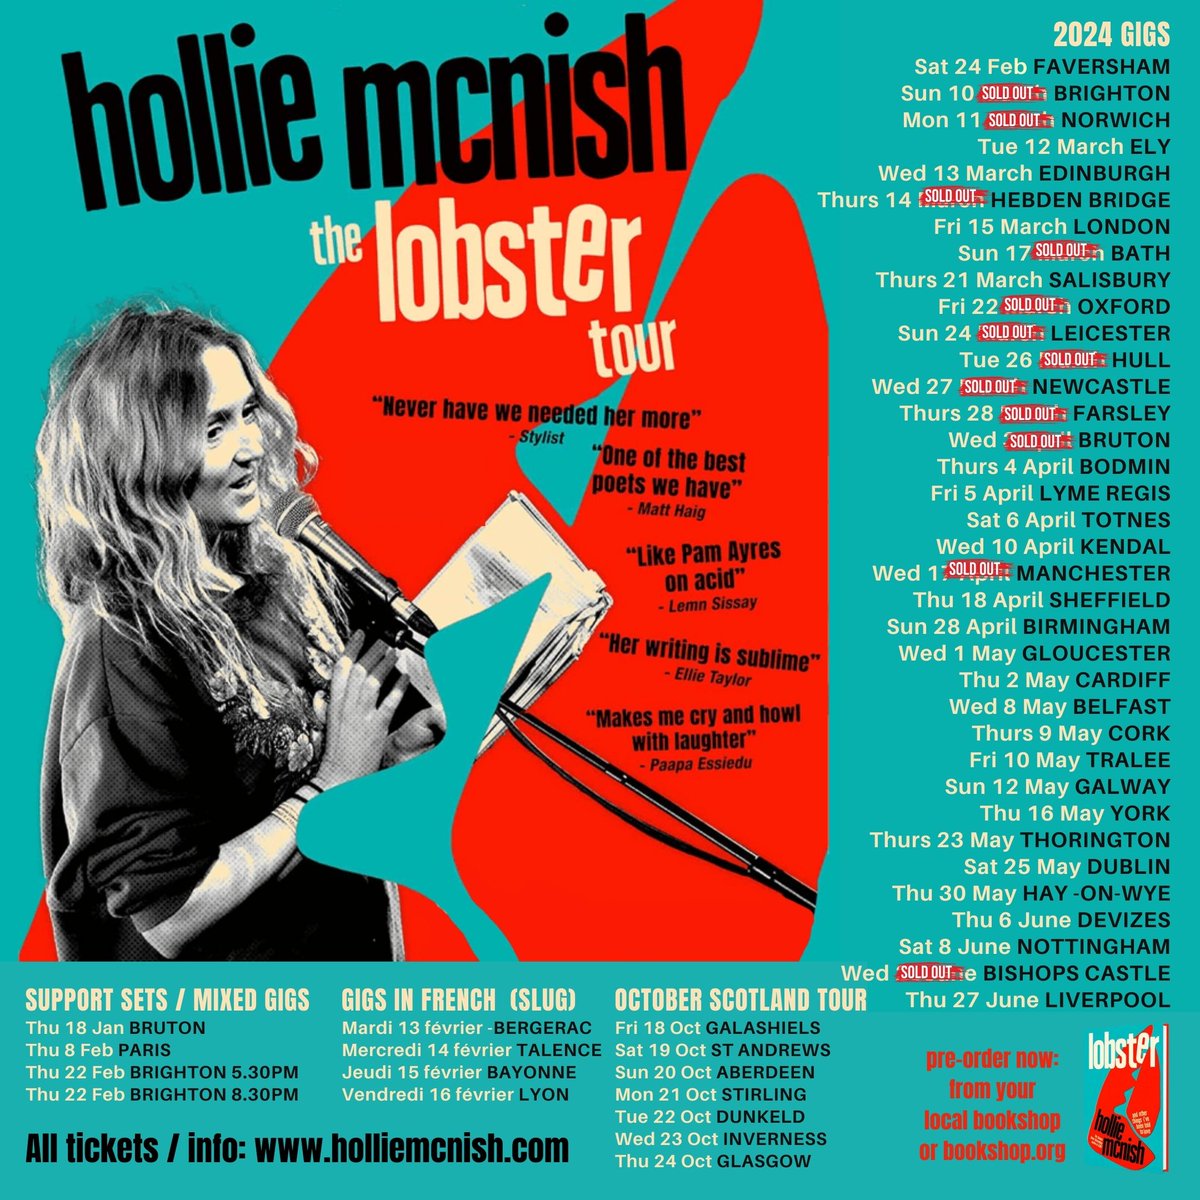 This Thurs 16th we will be back at @YorkTheatre for an event with @holliepoetry as part of her LOBSTER tour. We can't wait! 🦞🦞🦞 Hollie's events are selling out quickly - so get your ticket while you can 🔽 yorktheatreroyal.co.uk/show/hollie-mc…